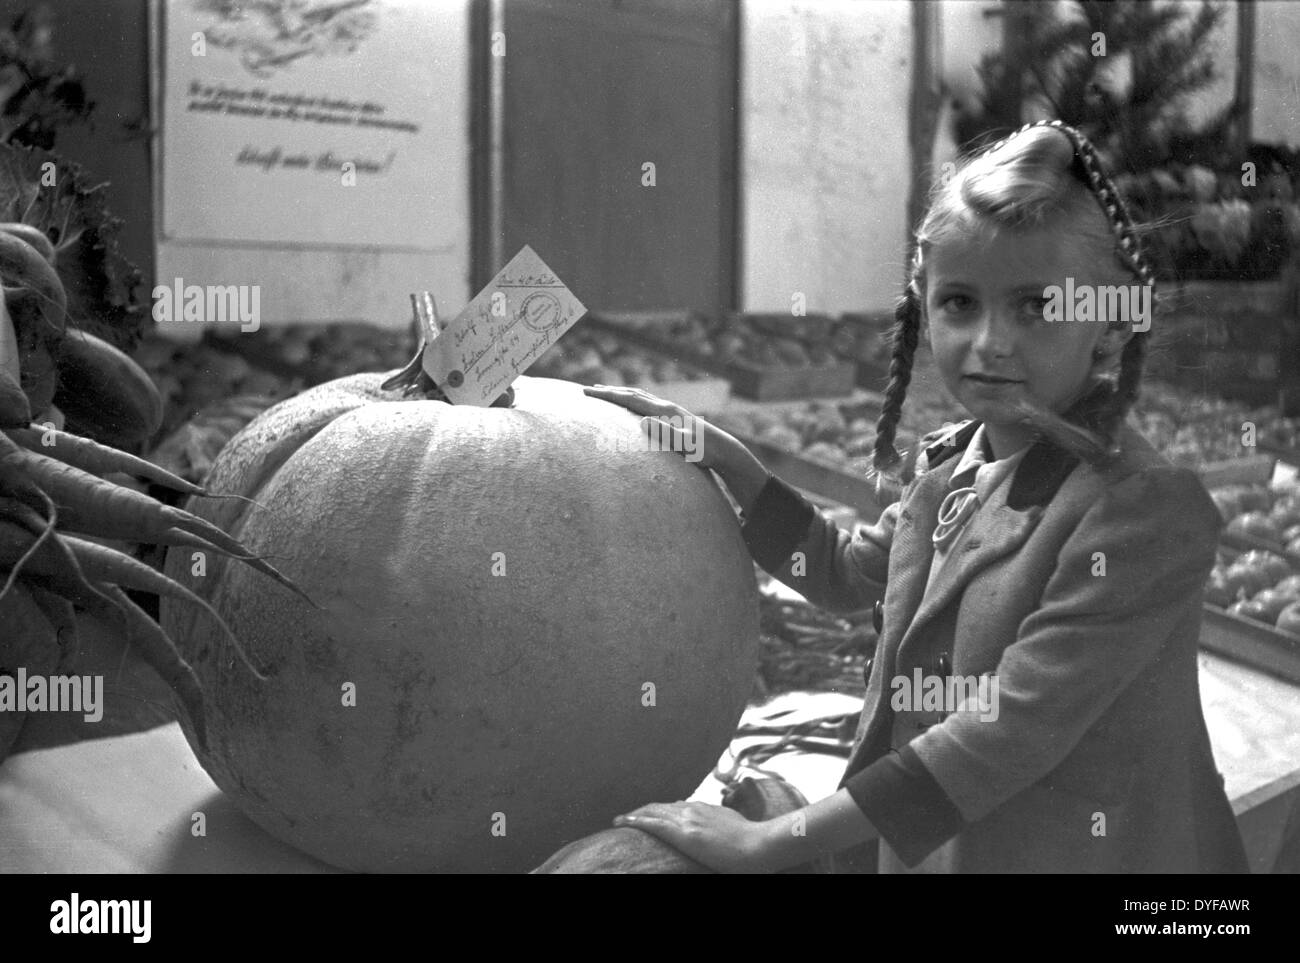 A girl is standing next to a pumpkin at the Green Week at the radio tower in Berlin-Halensee, in 1948. The agricultural exhibition, which takes place since 1926, was continued in 1948 after a break of several years. Stock Photo